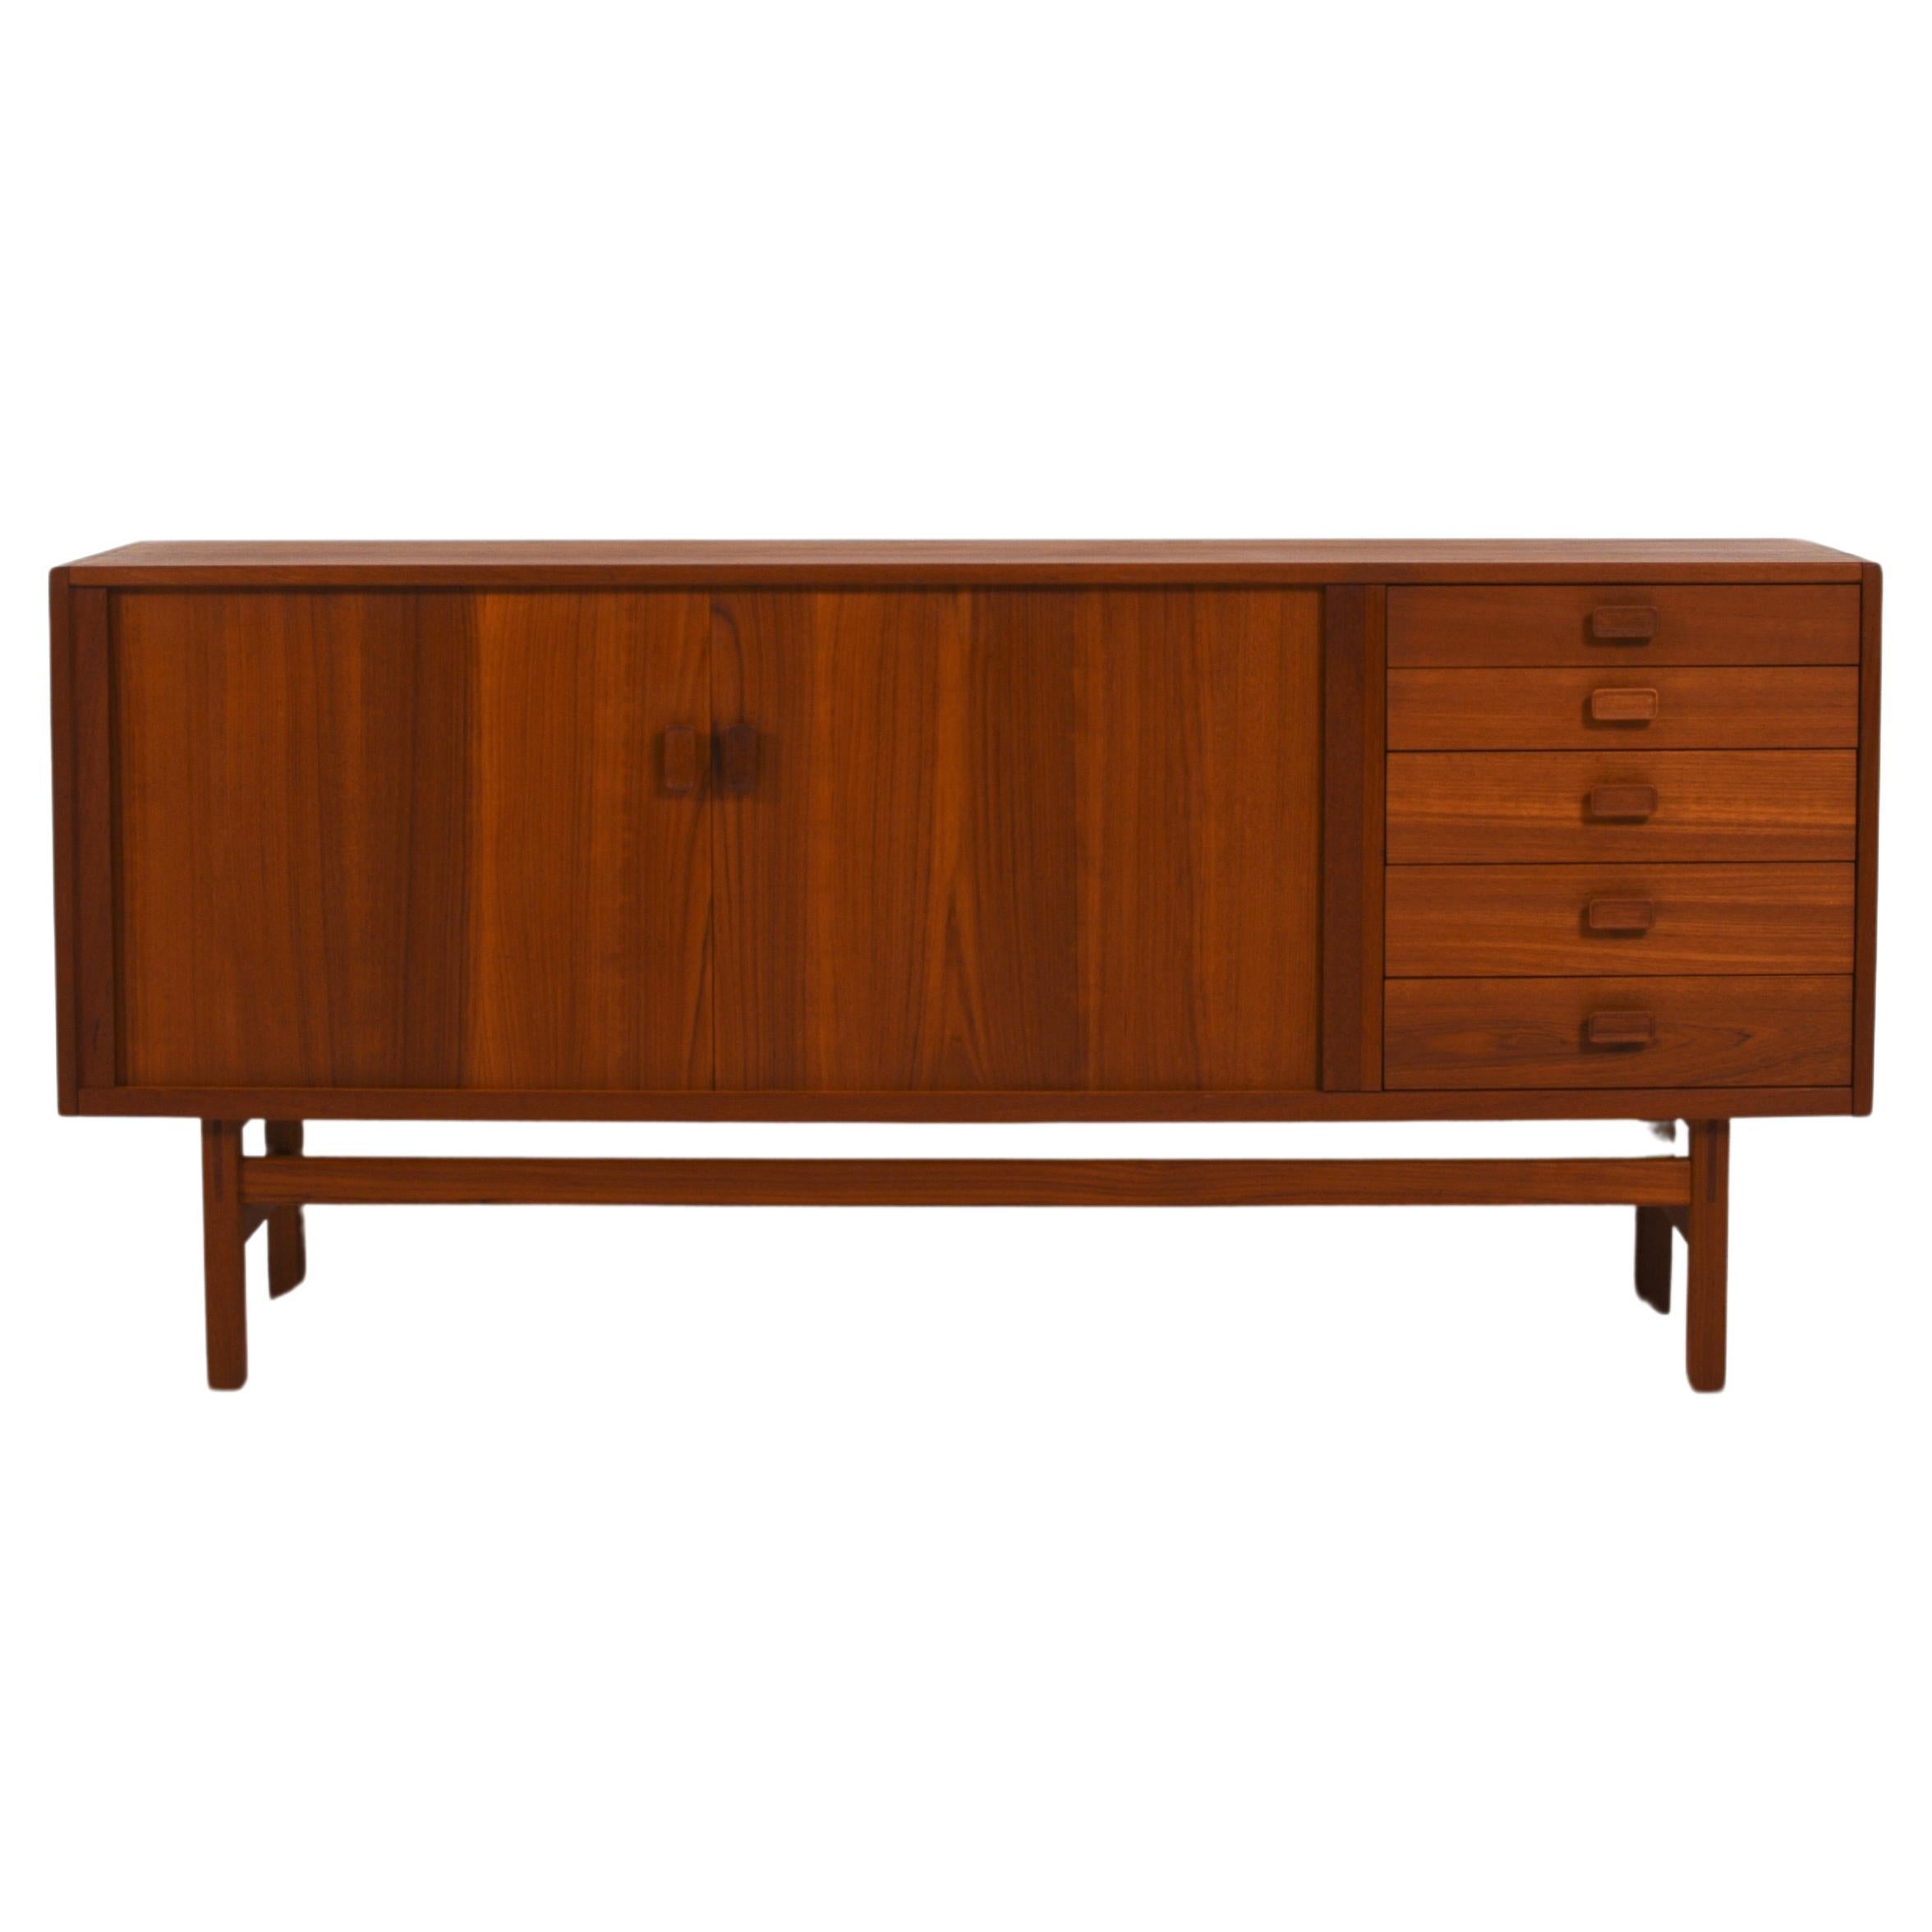 Sideboard "Oden" by Nils Jonsson for Troeds, Bra Bohag For Sale